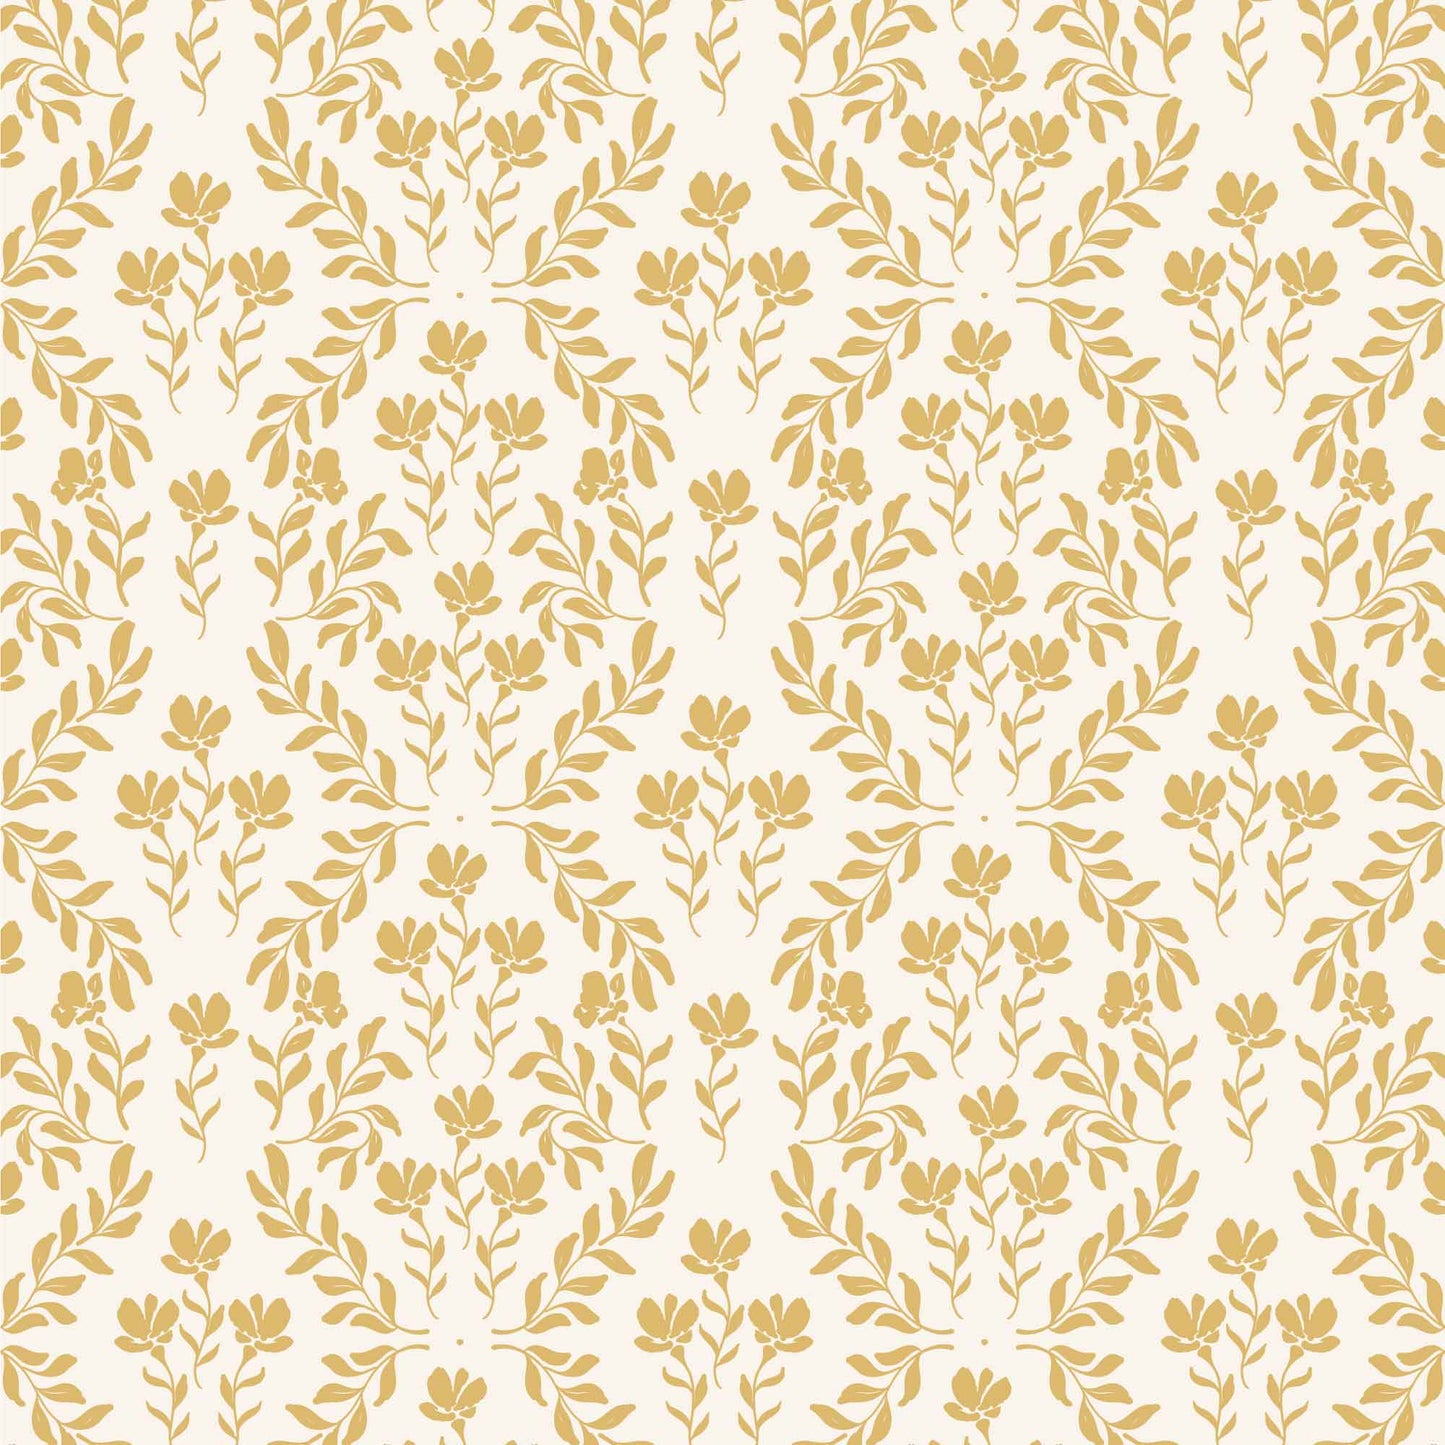 Indulge in the delicate beauty of our Renaissance Revival Wallpaper. Its soft ochre tones and intricate floral design exude elegance and sophistication, adding a touch of luxury to any room.